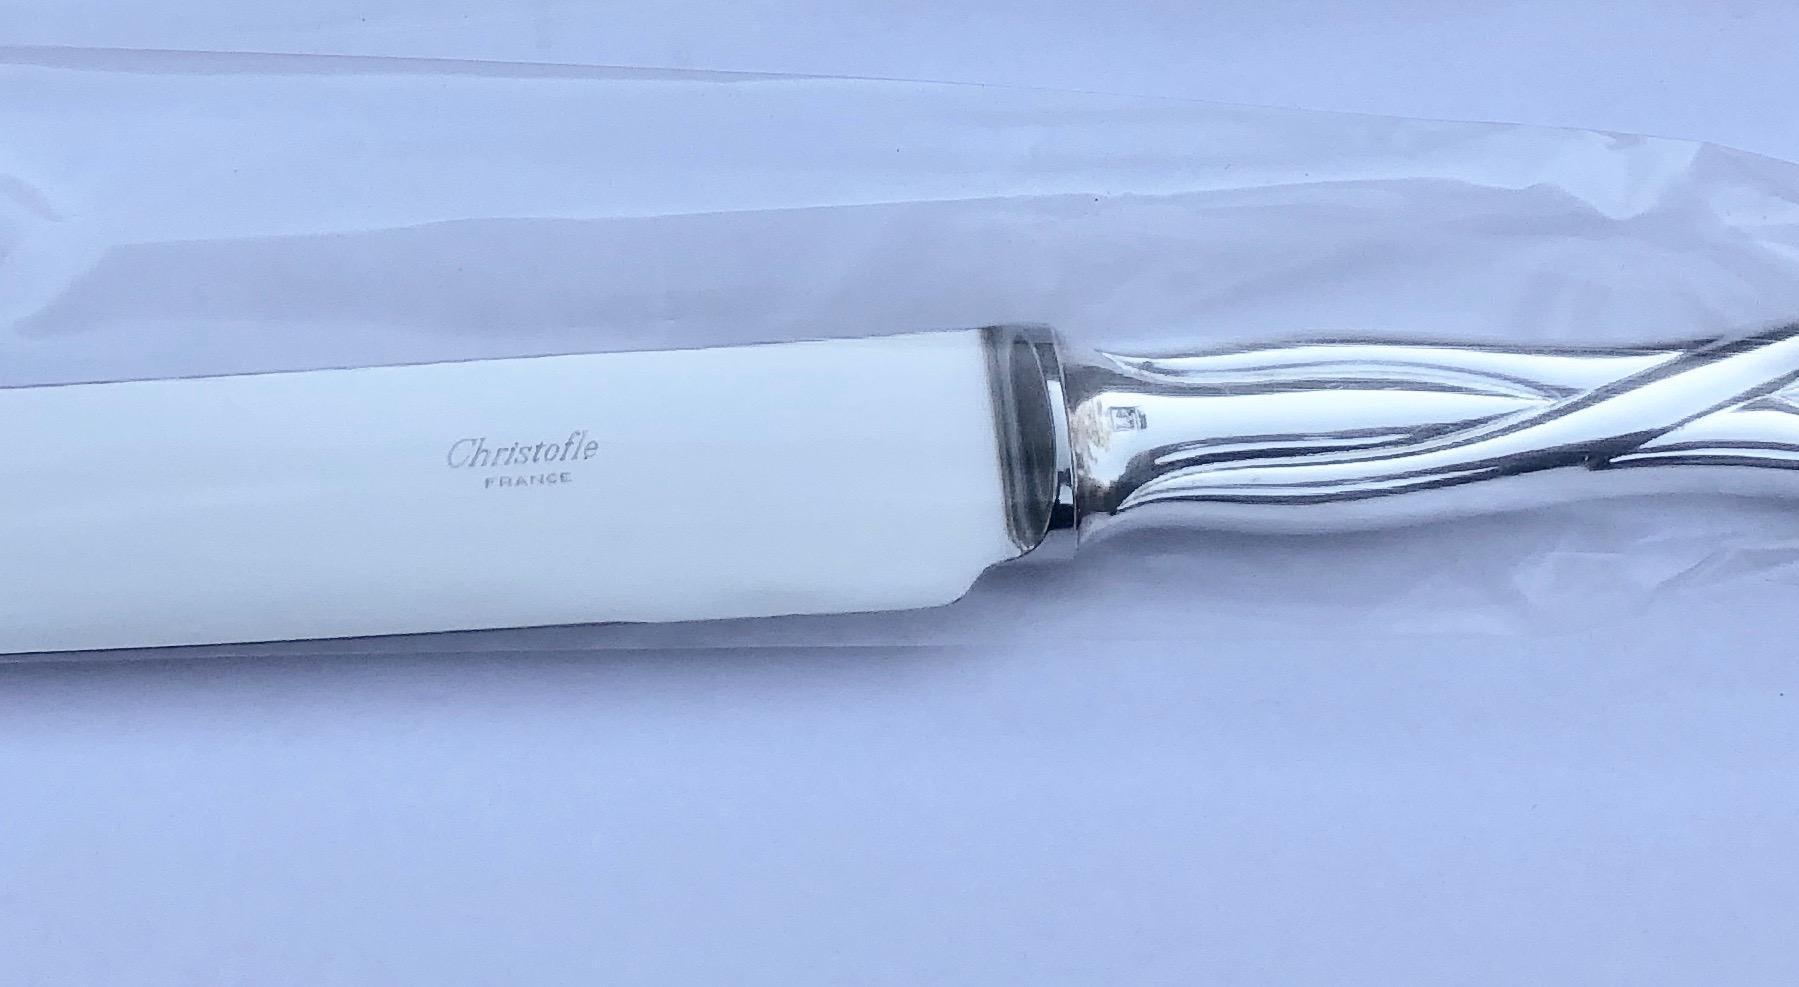 French Christofle Silverplated Galea, Carving Fork and Knife Set, New in Box In Excellent Condition For Sale In Petaluma, CA